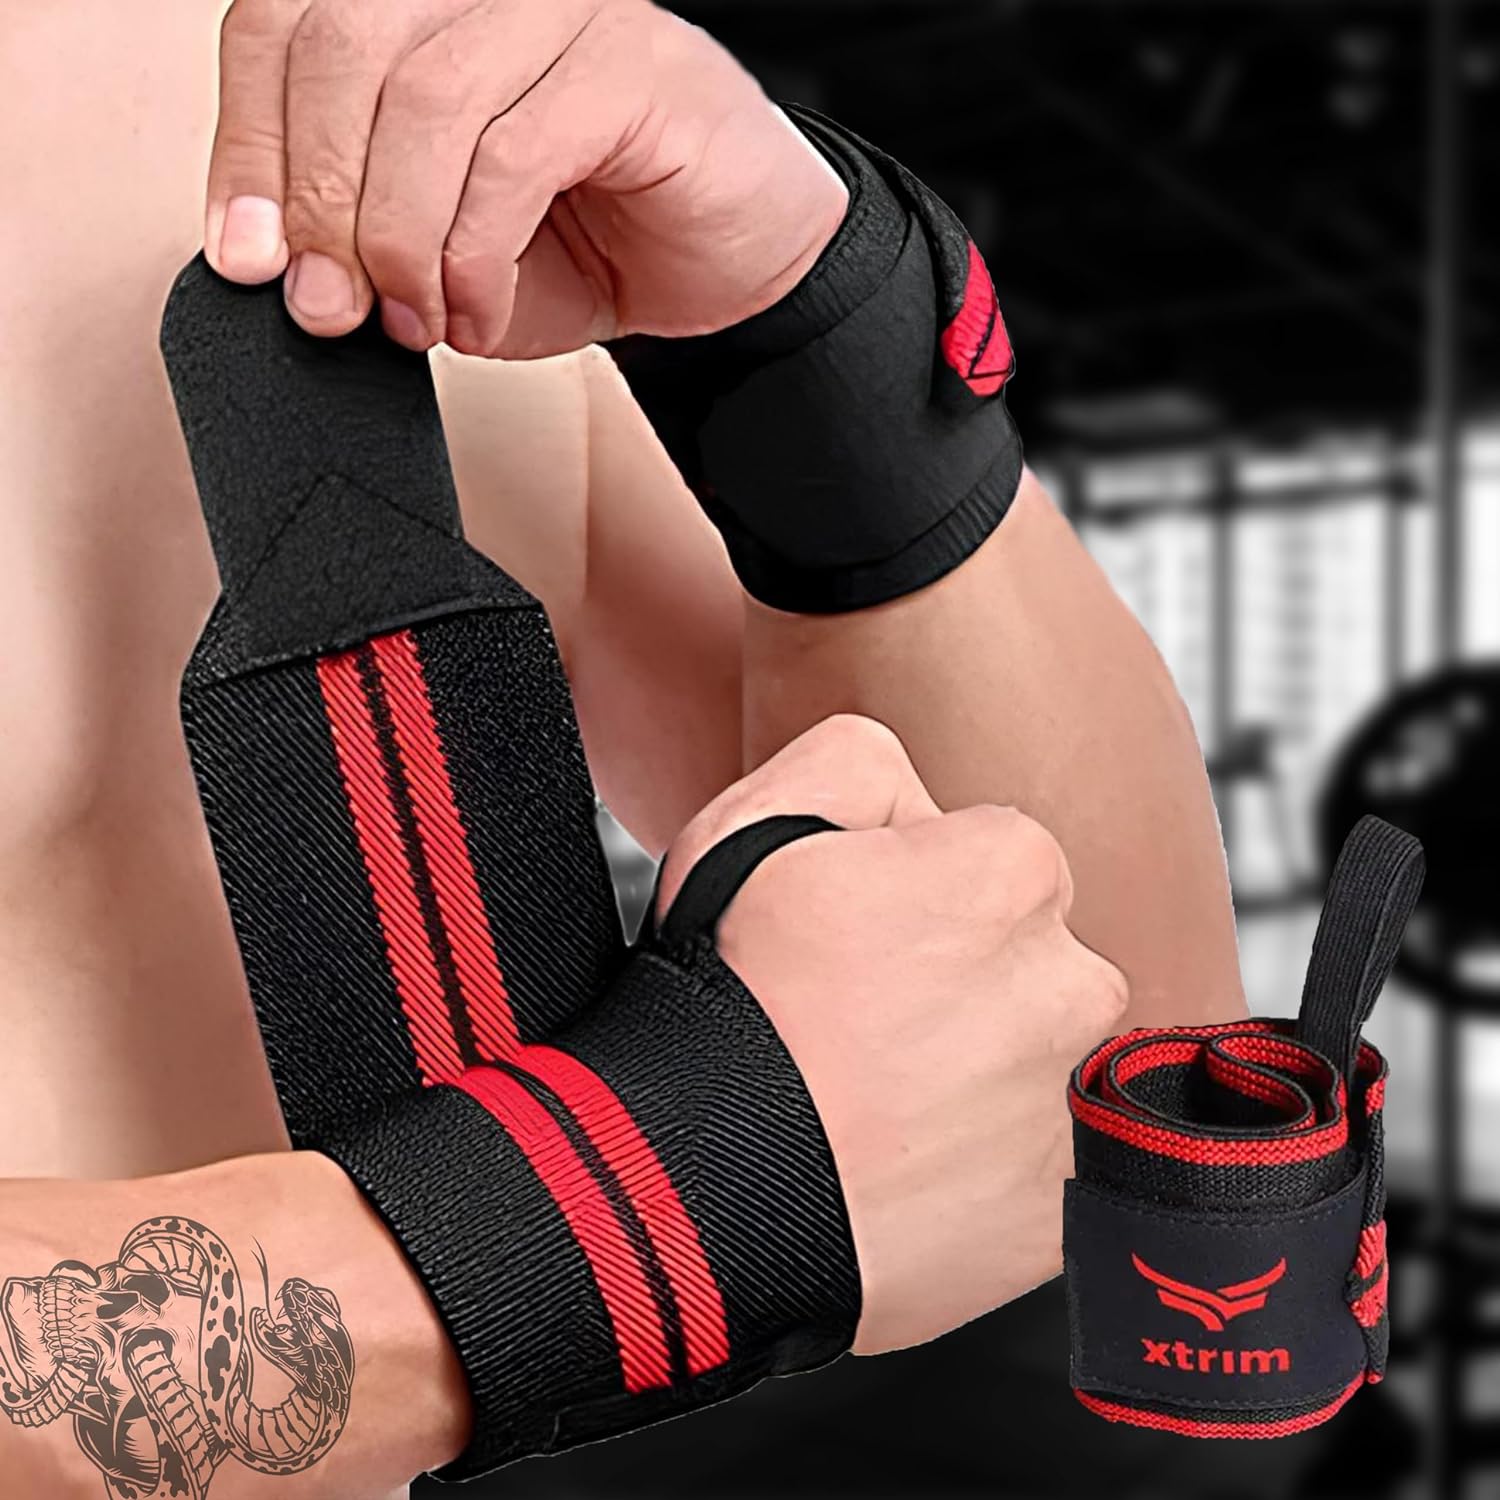 One Size Fits All Unisex Leather Gym Gloves + Wrist Support for Men &amp; Women ( BUY 1 GET 1 FREE )